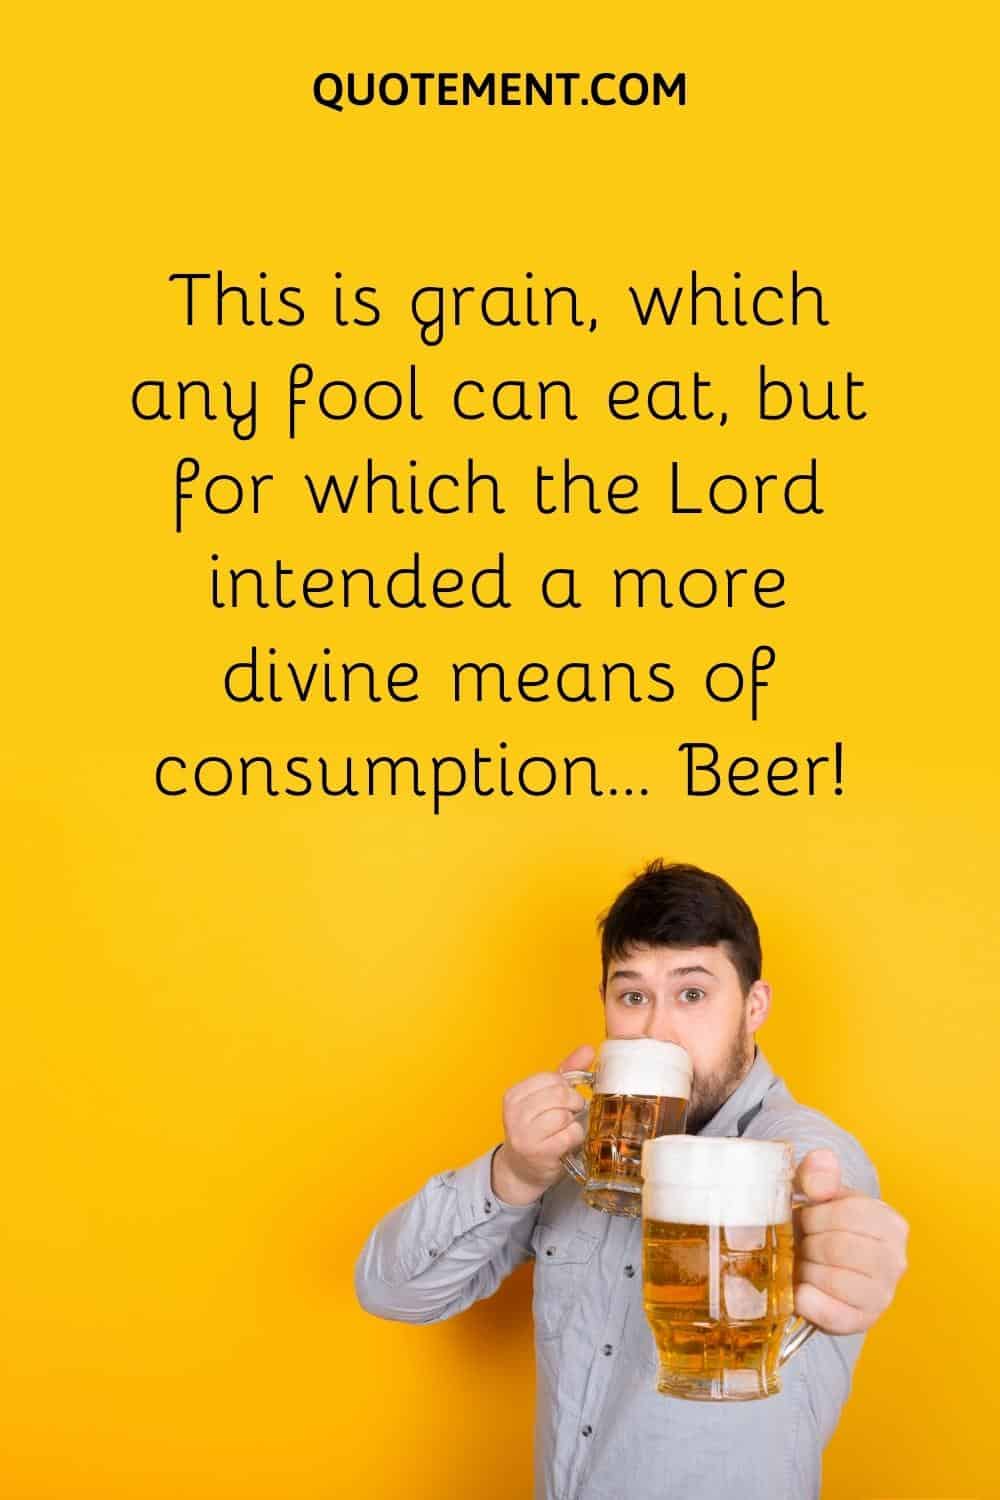 This is grain, which any fool can eat, but for which the Lord intended a more divine means of consumption… Beer!